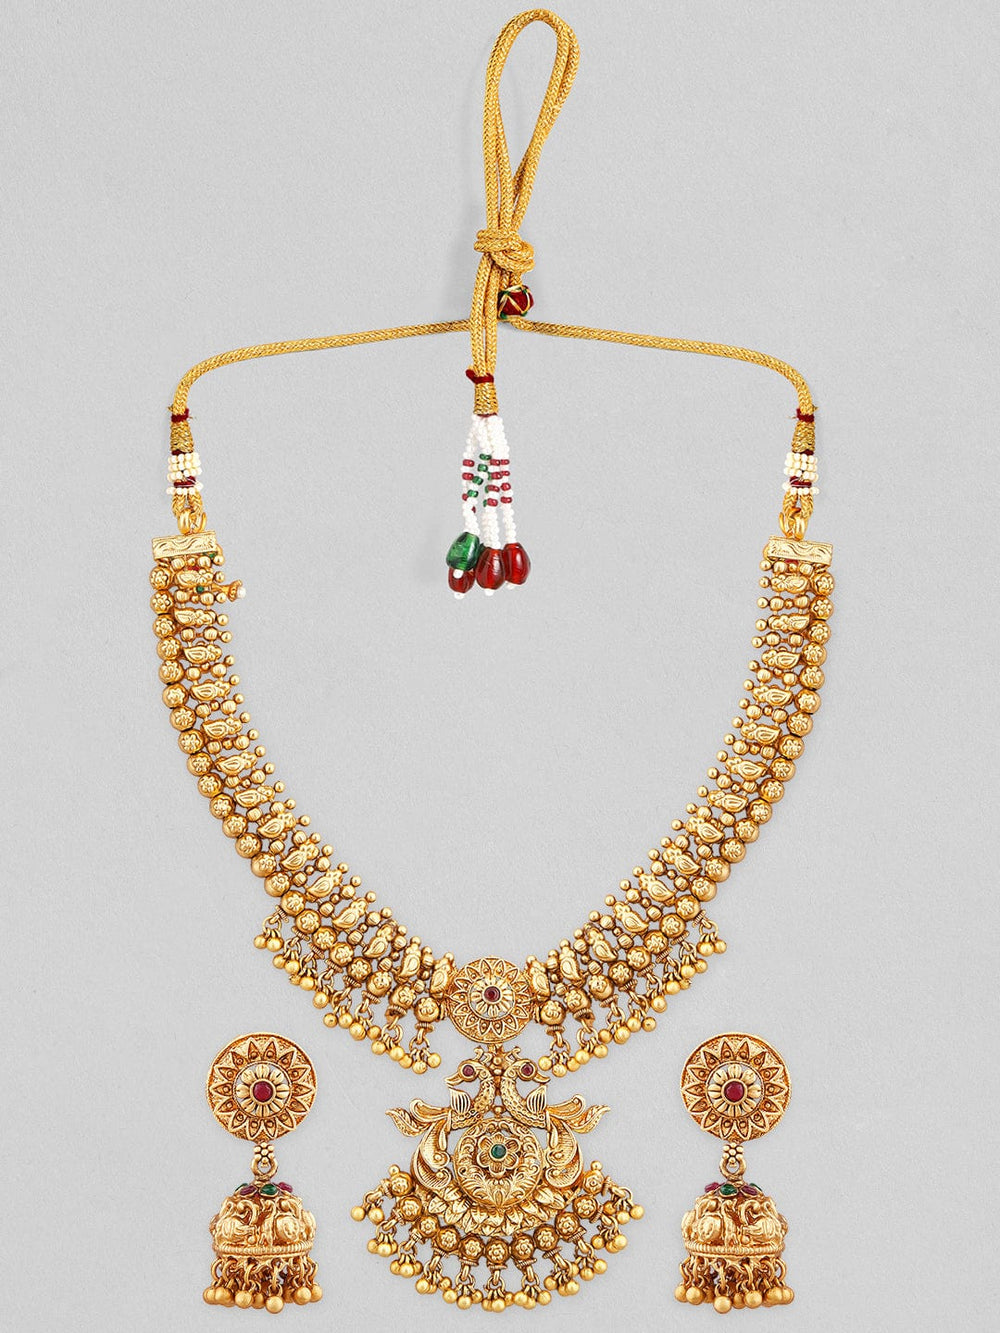 Rubans 24K Gold Plated Temple Necklace Set With Peacock Motifs. Necklace Set